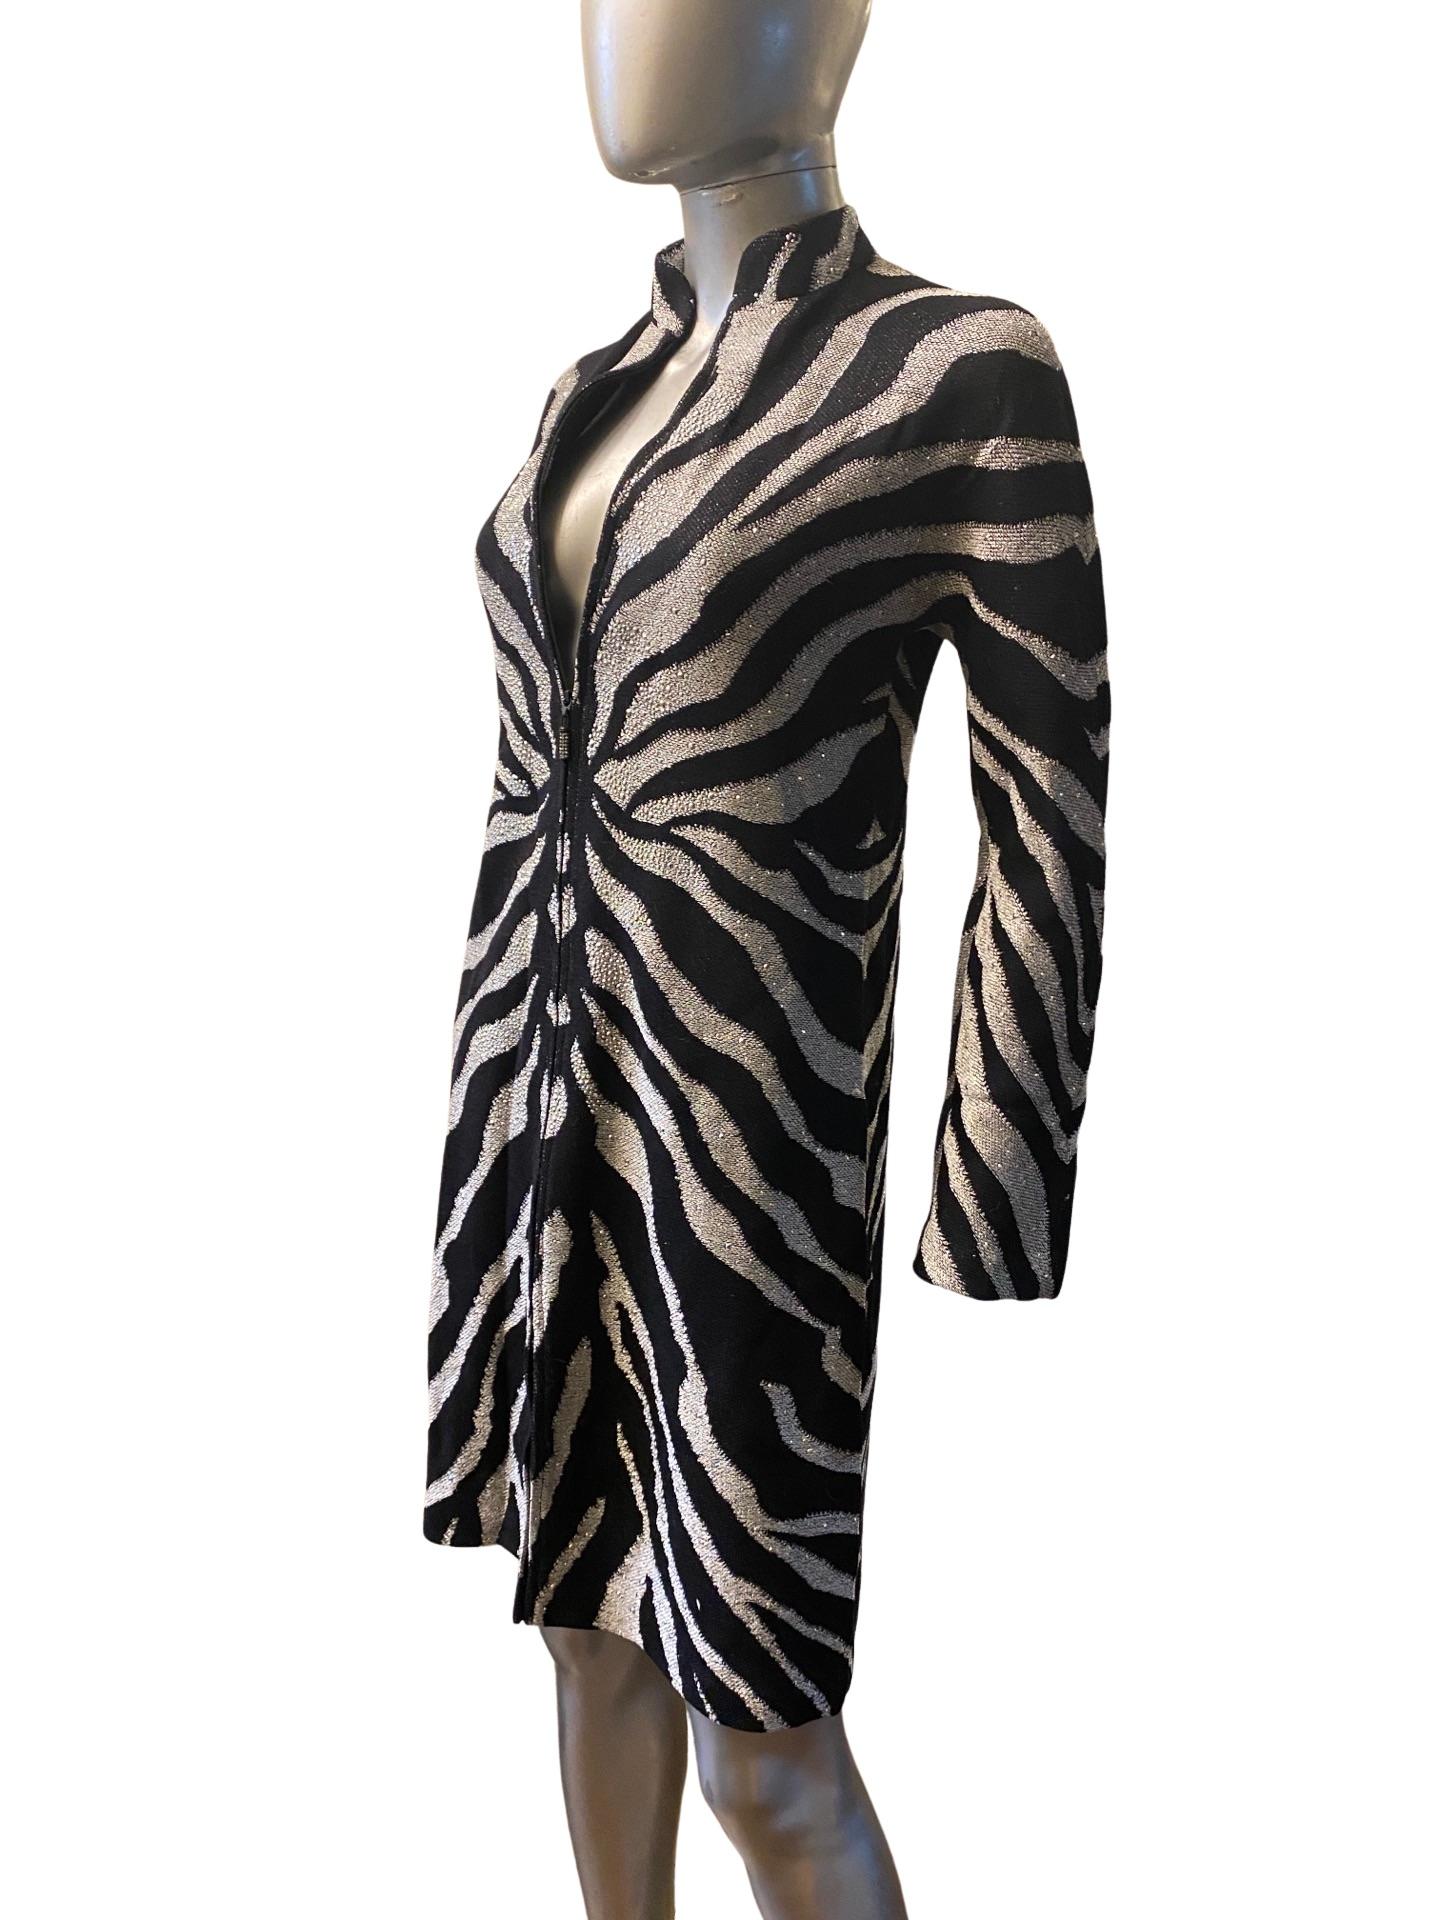 St John Evening Zebra Knit Zip Front Dress with Silver Beading Size 2 NWT For Sale 4